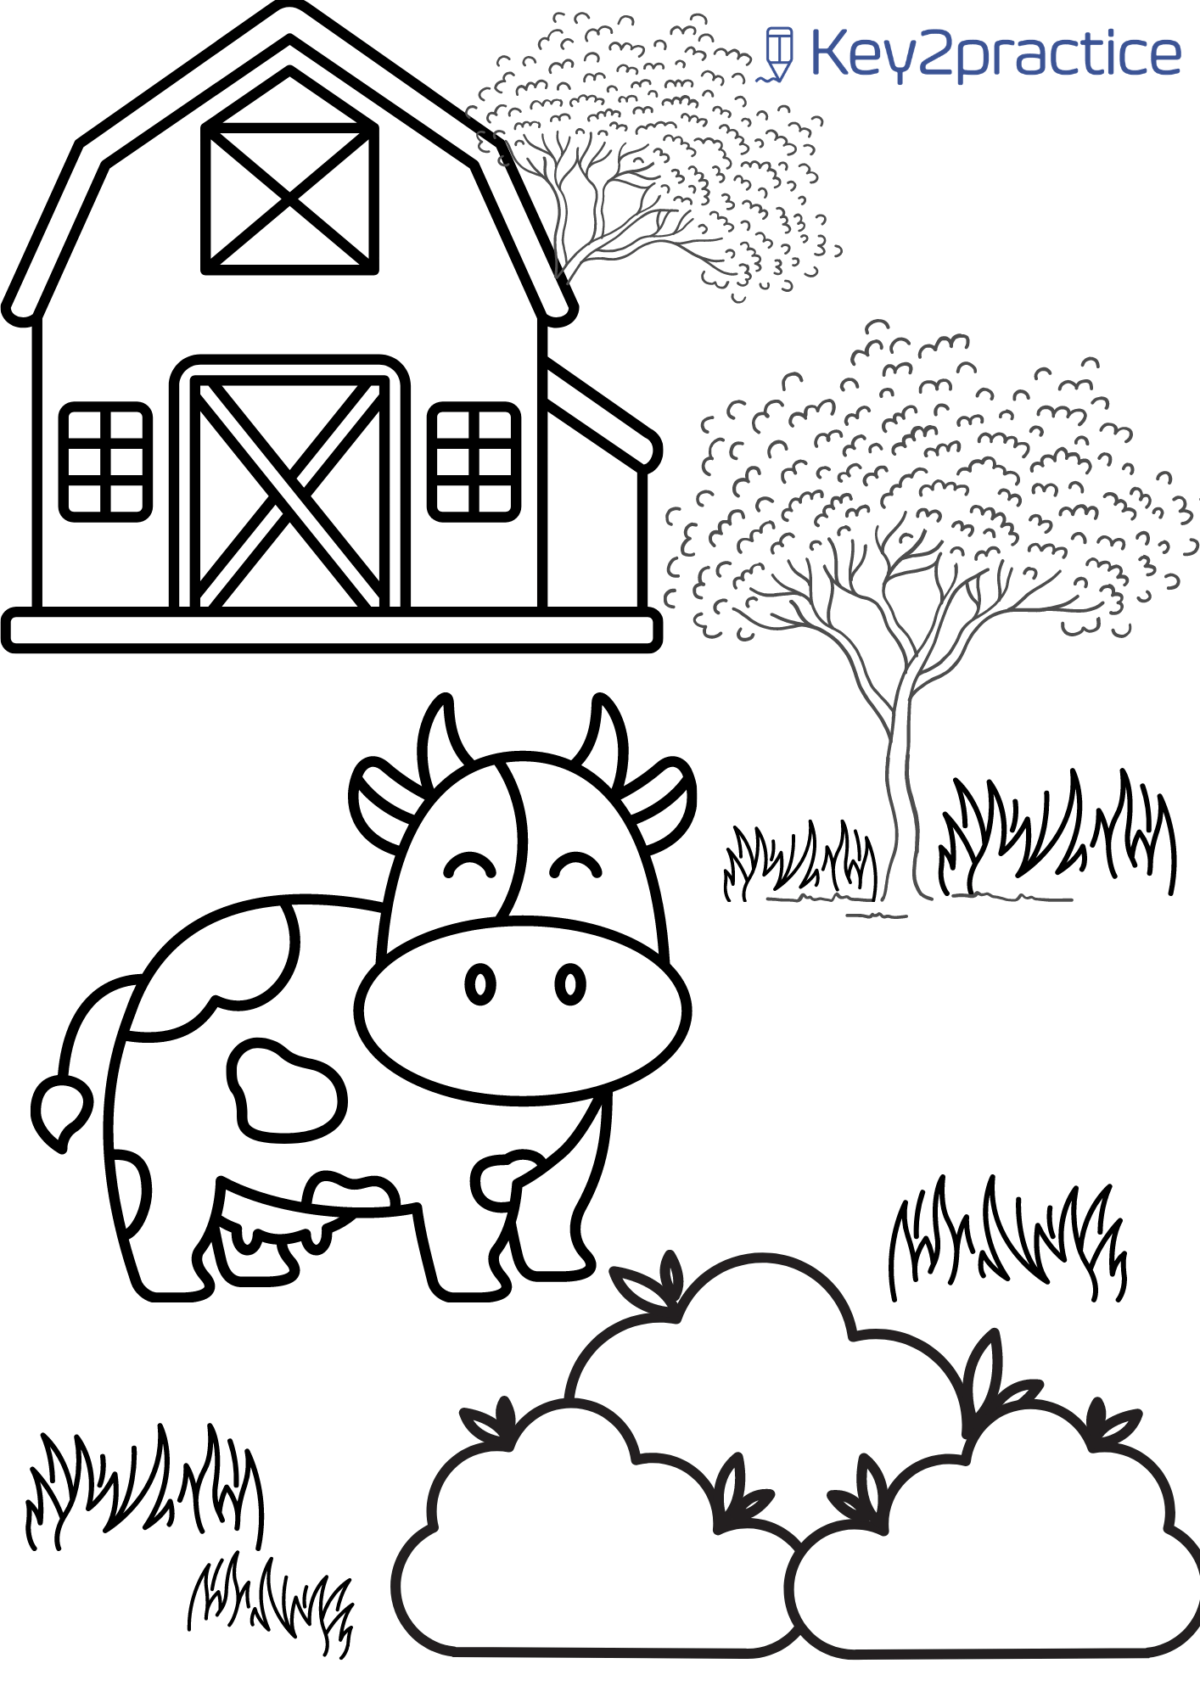 Free Worksheets I Colouring Sheets I Pre Primary - Key2practice